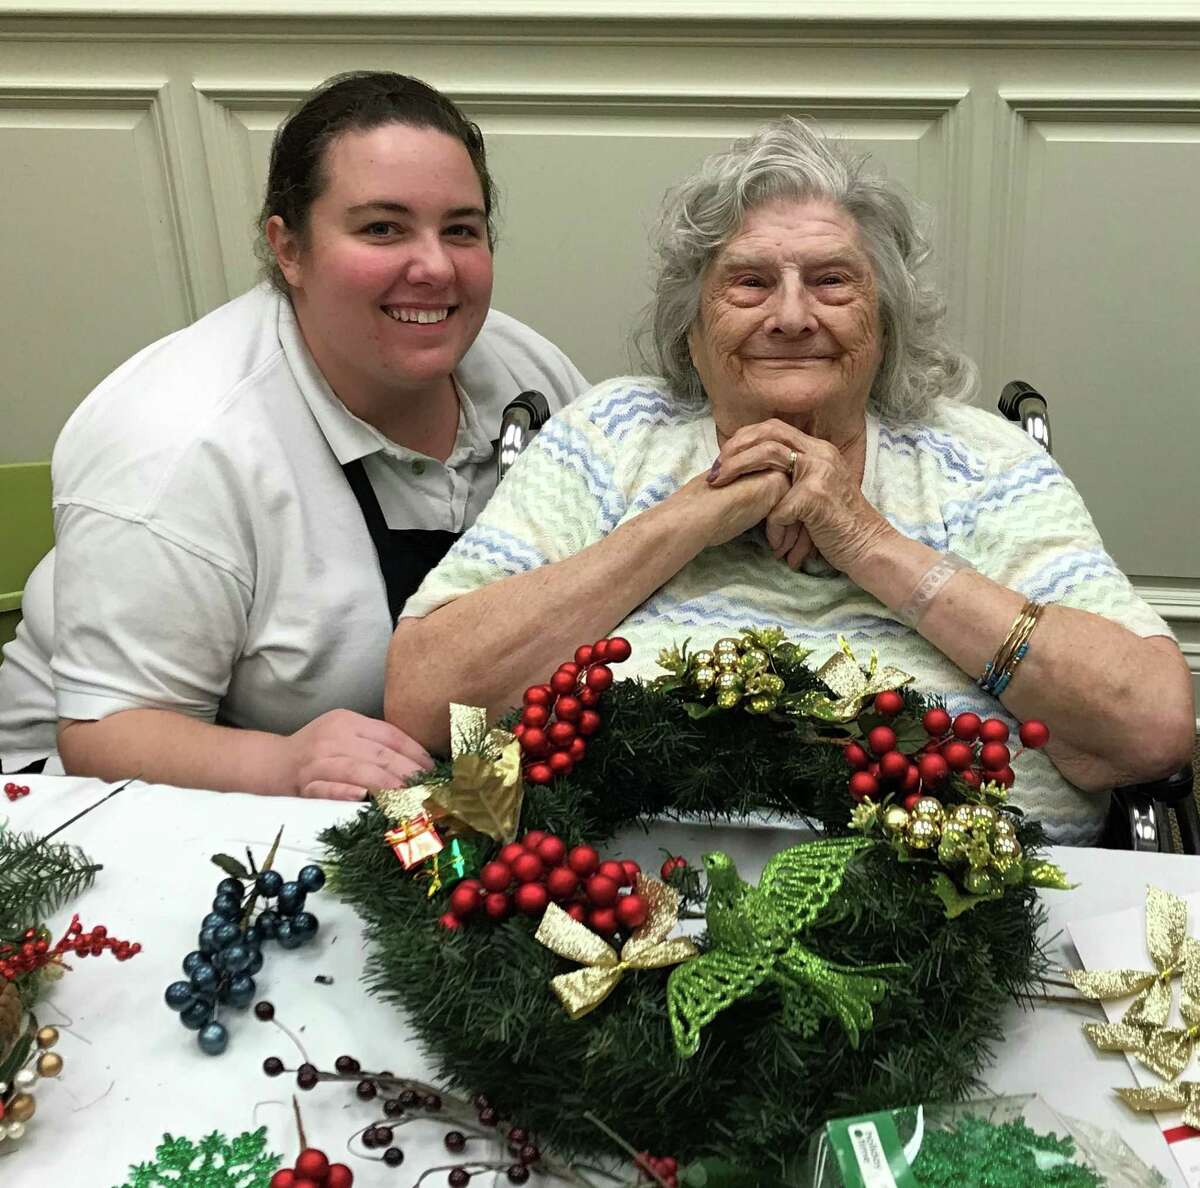 Popcorn garland stations, cookie recipes and holiday greetings for the troops are all part of this year’s holiday celebration at Bishop Wicke Health and Rehabilitation Center on the Wesley Village campus in Shelton.